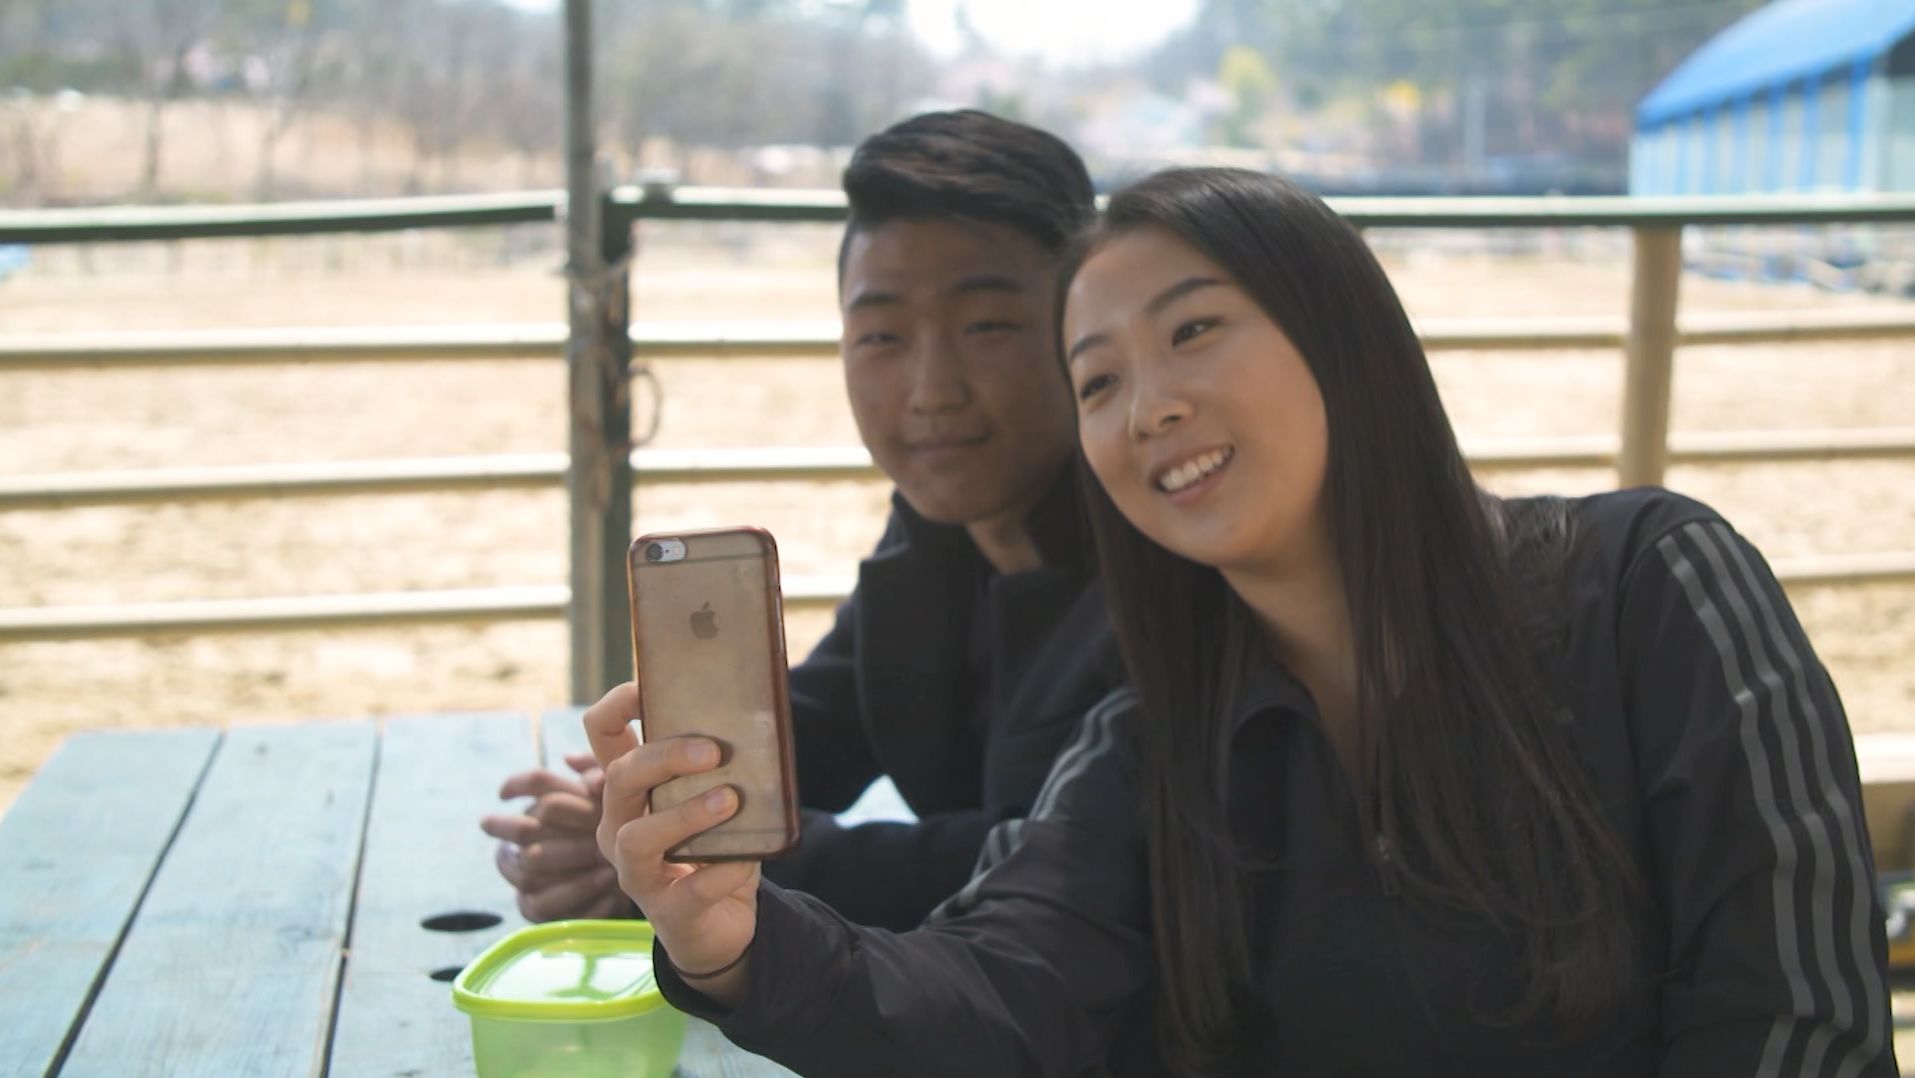 Korean Teen Girls - Why young South Koreans aren't interested in dating | CNN